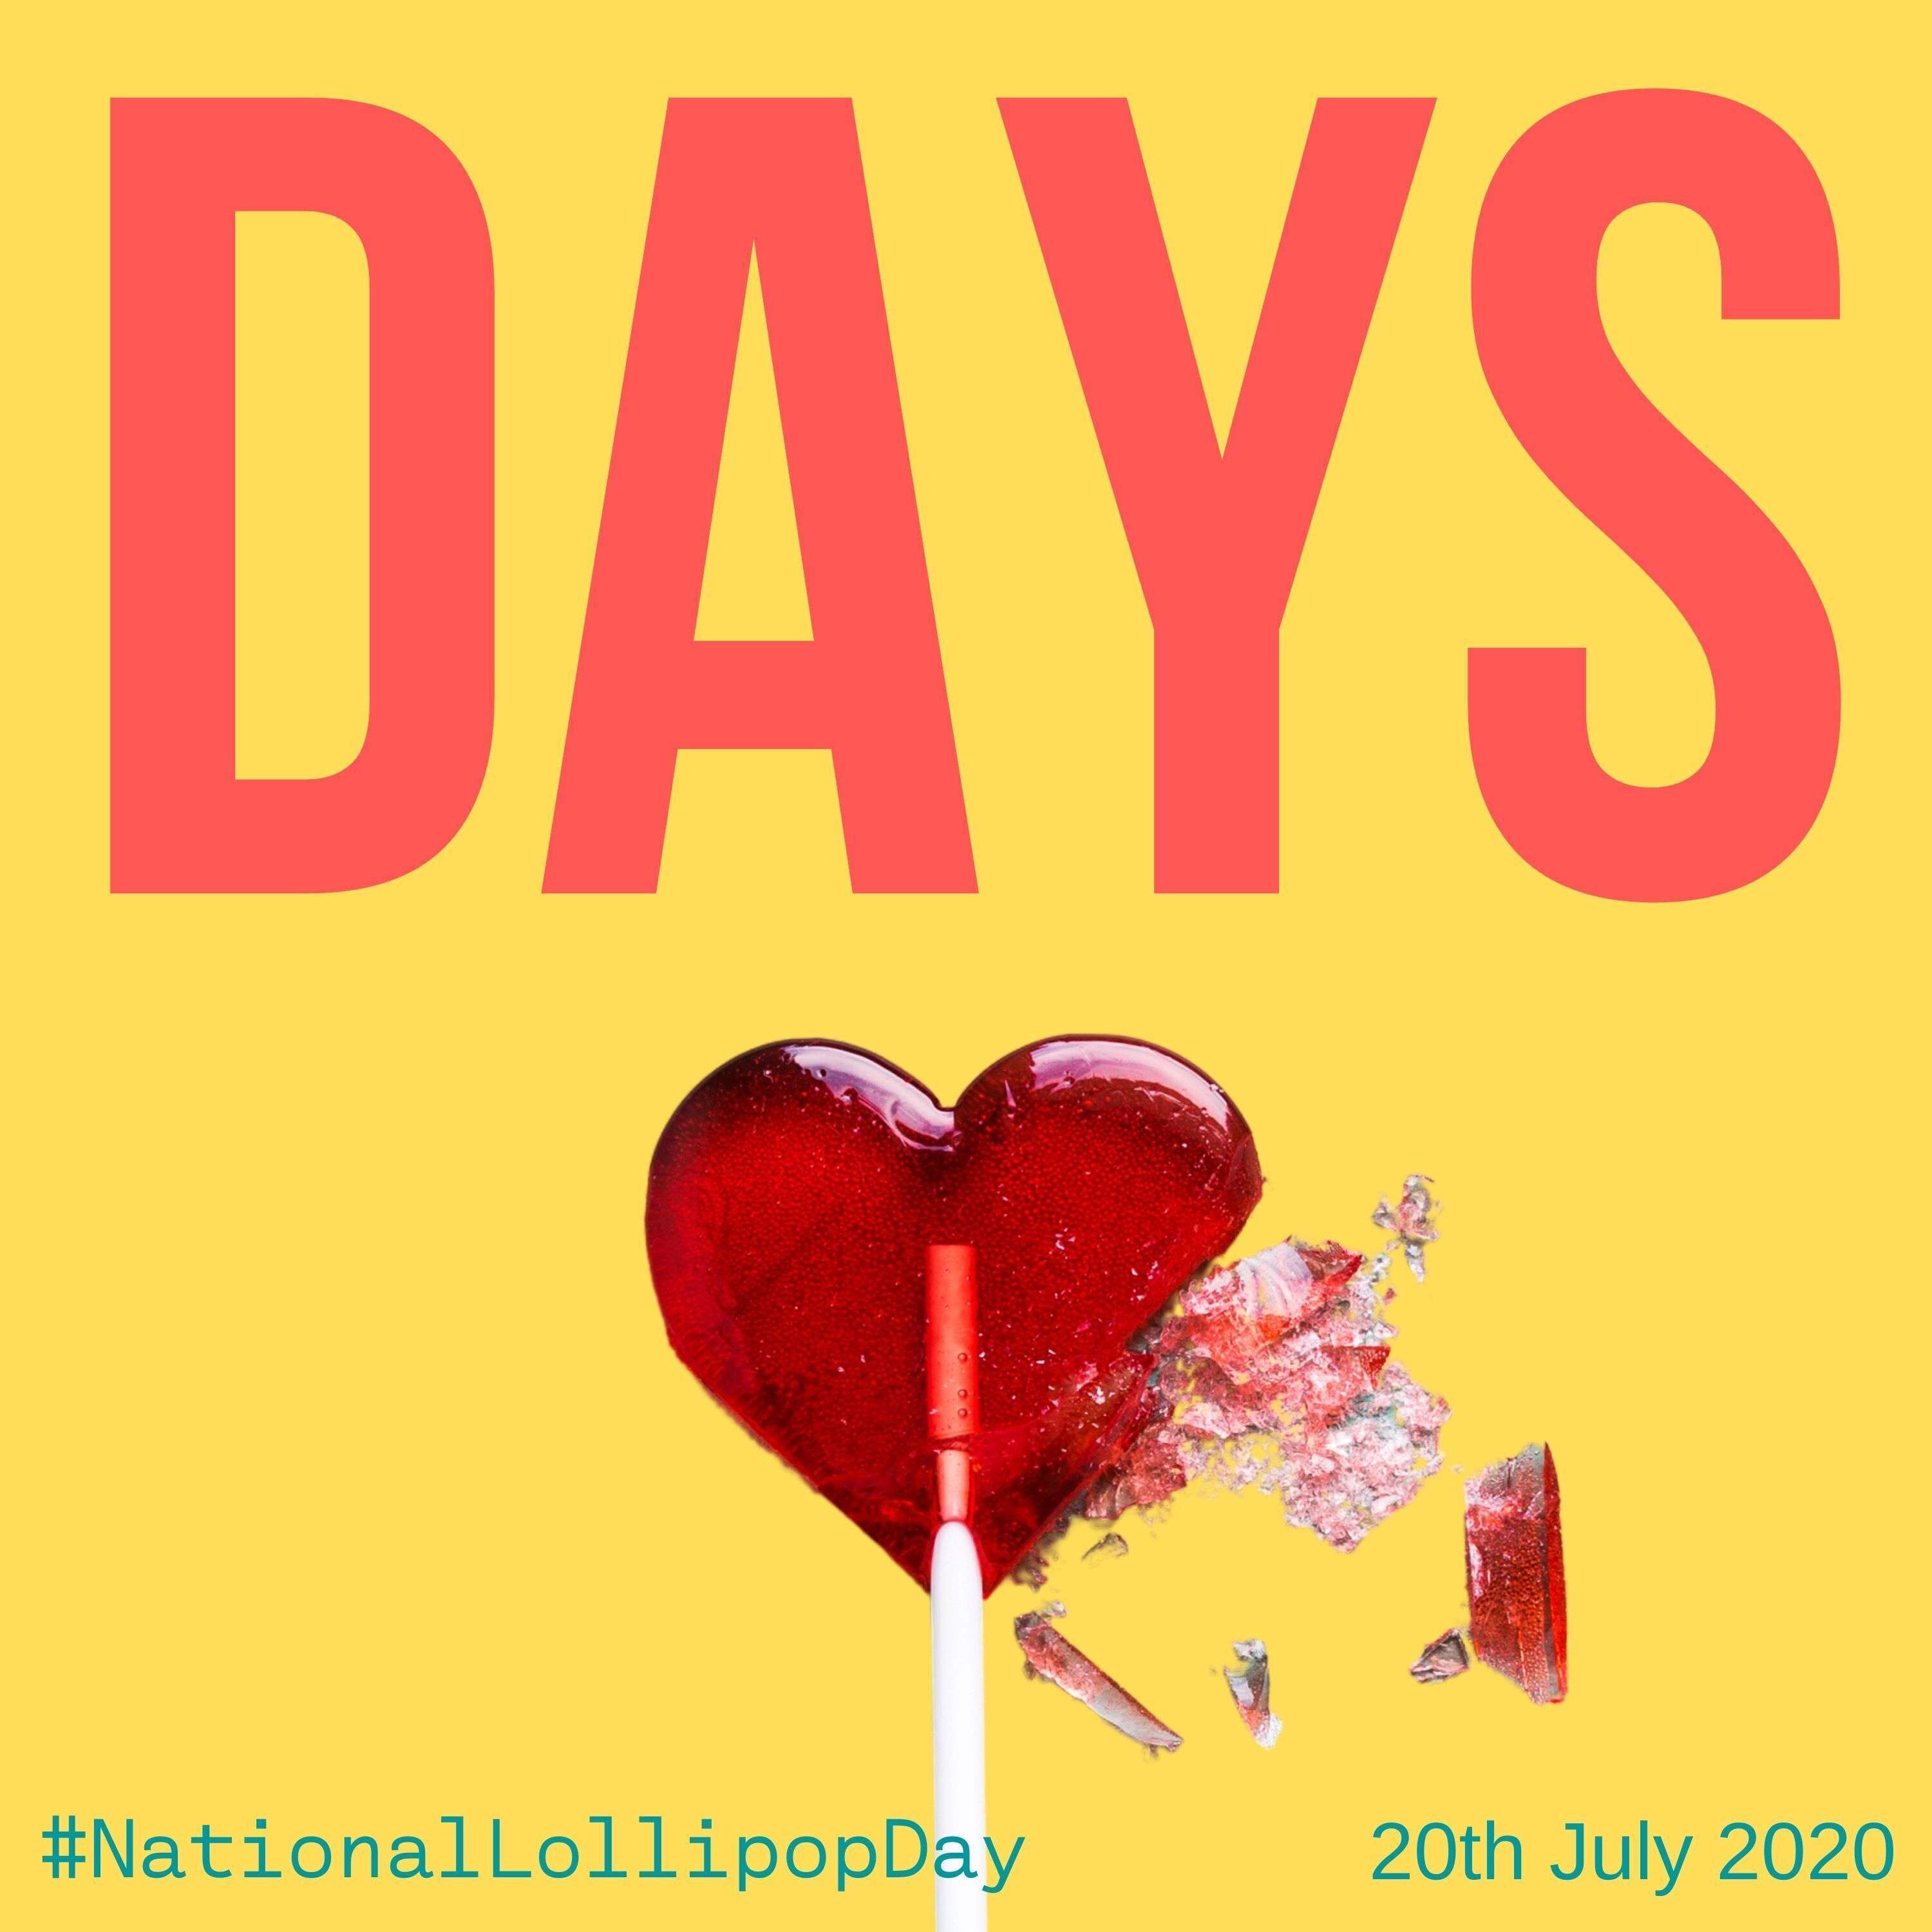 National Lollipop Day - 20th July 2020